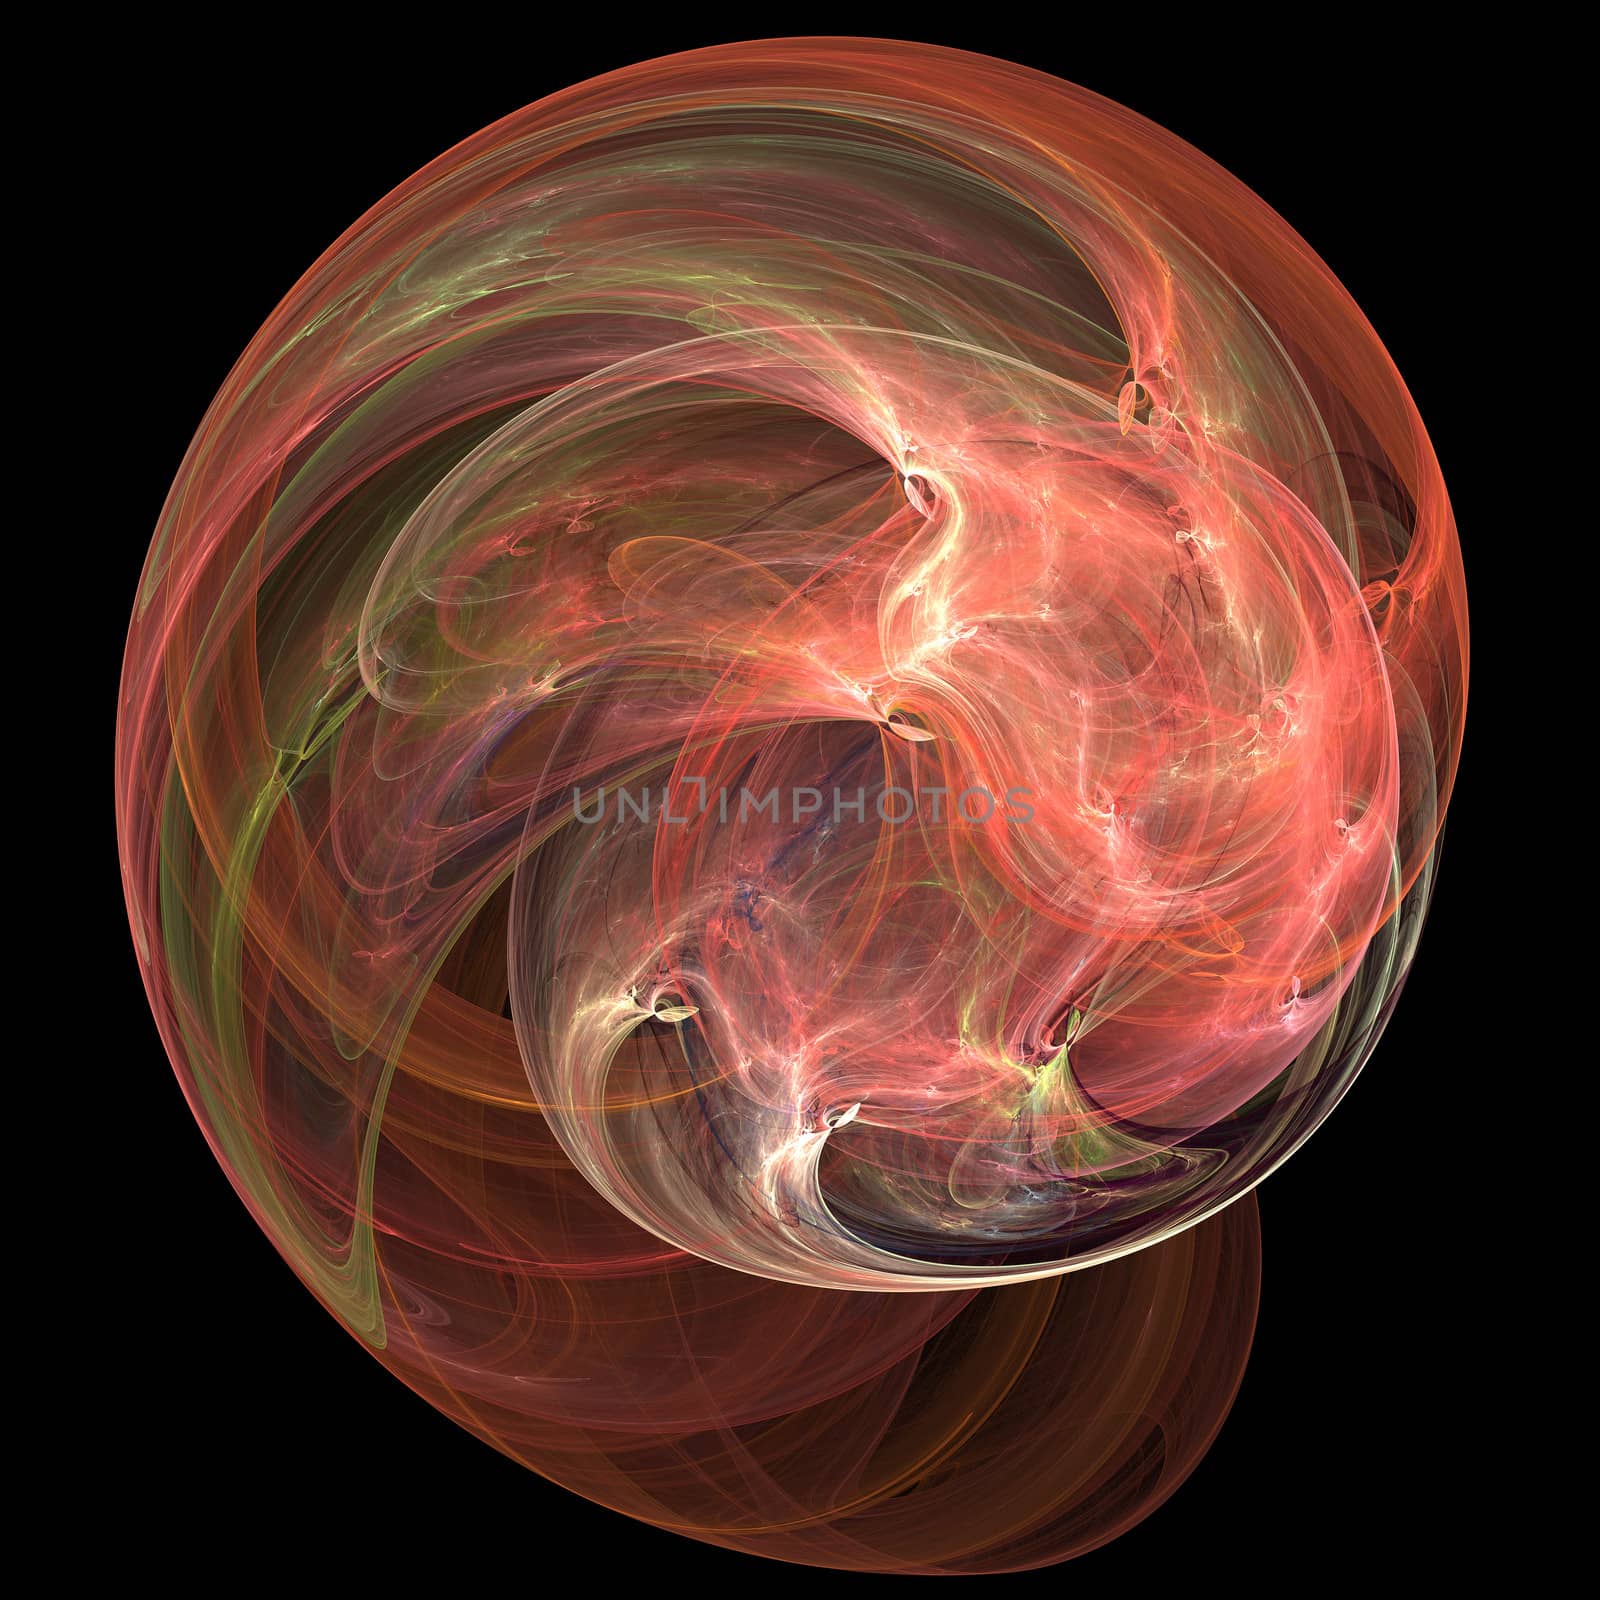 Abstract fractal background, best viewed many details when viewed at full size